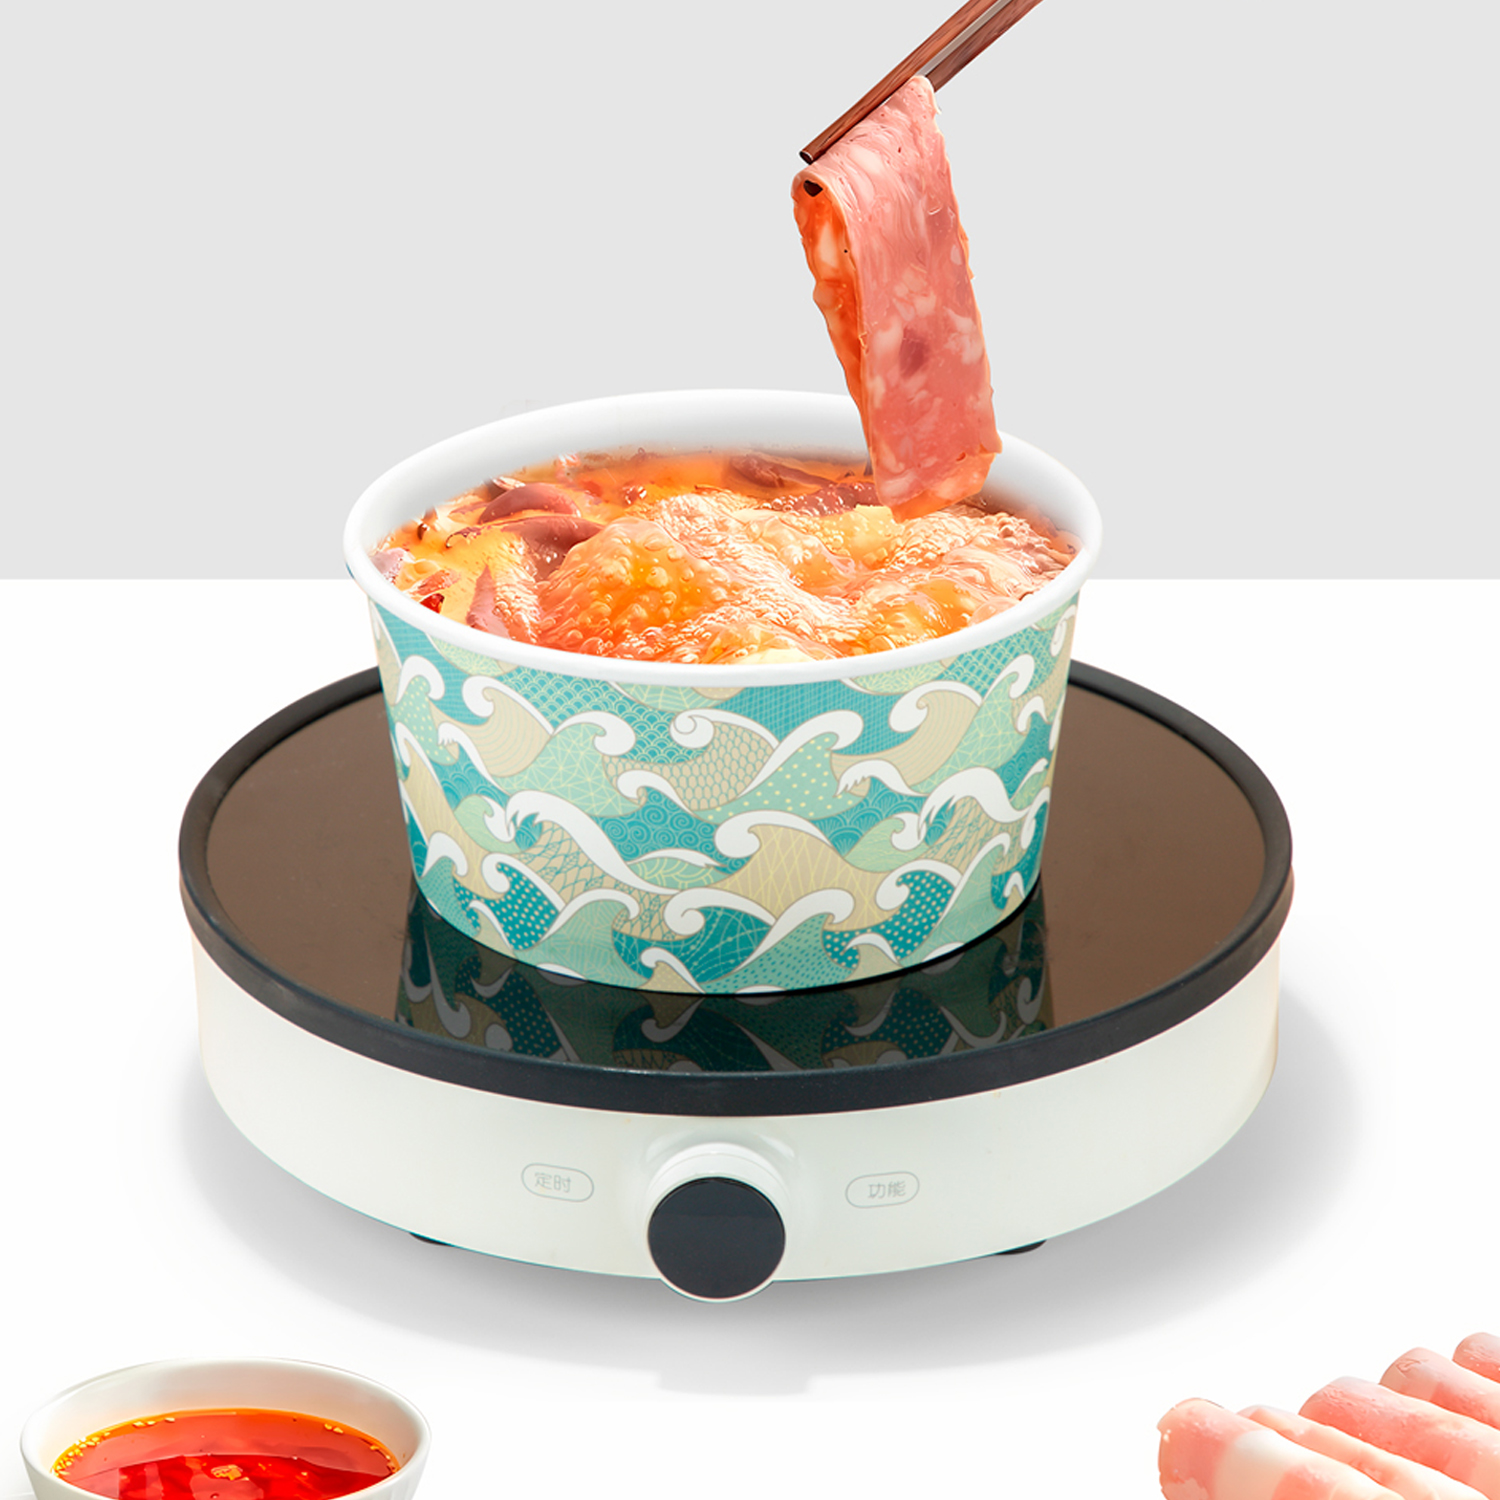 Disposable paper bowl, induction cooker can be used for paper bowl, Korean instant noodle bowl